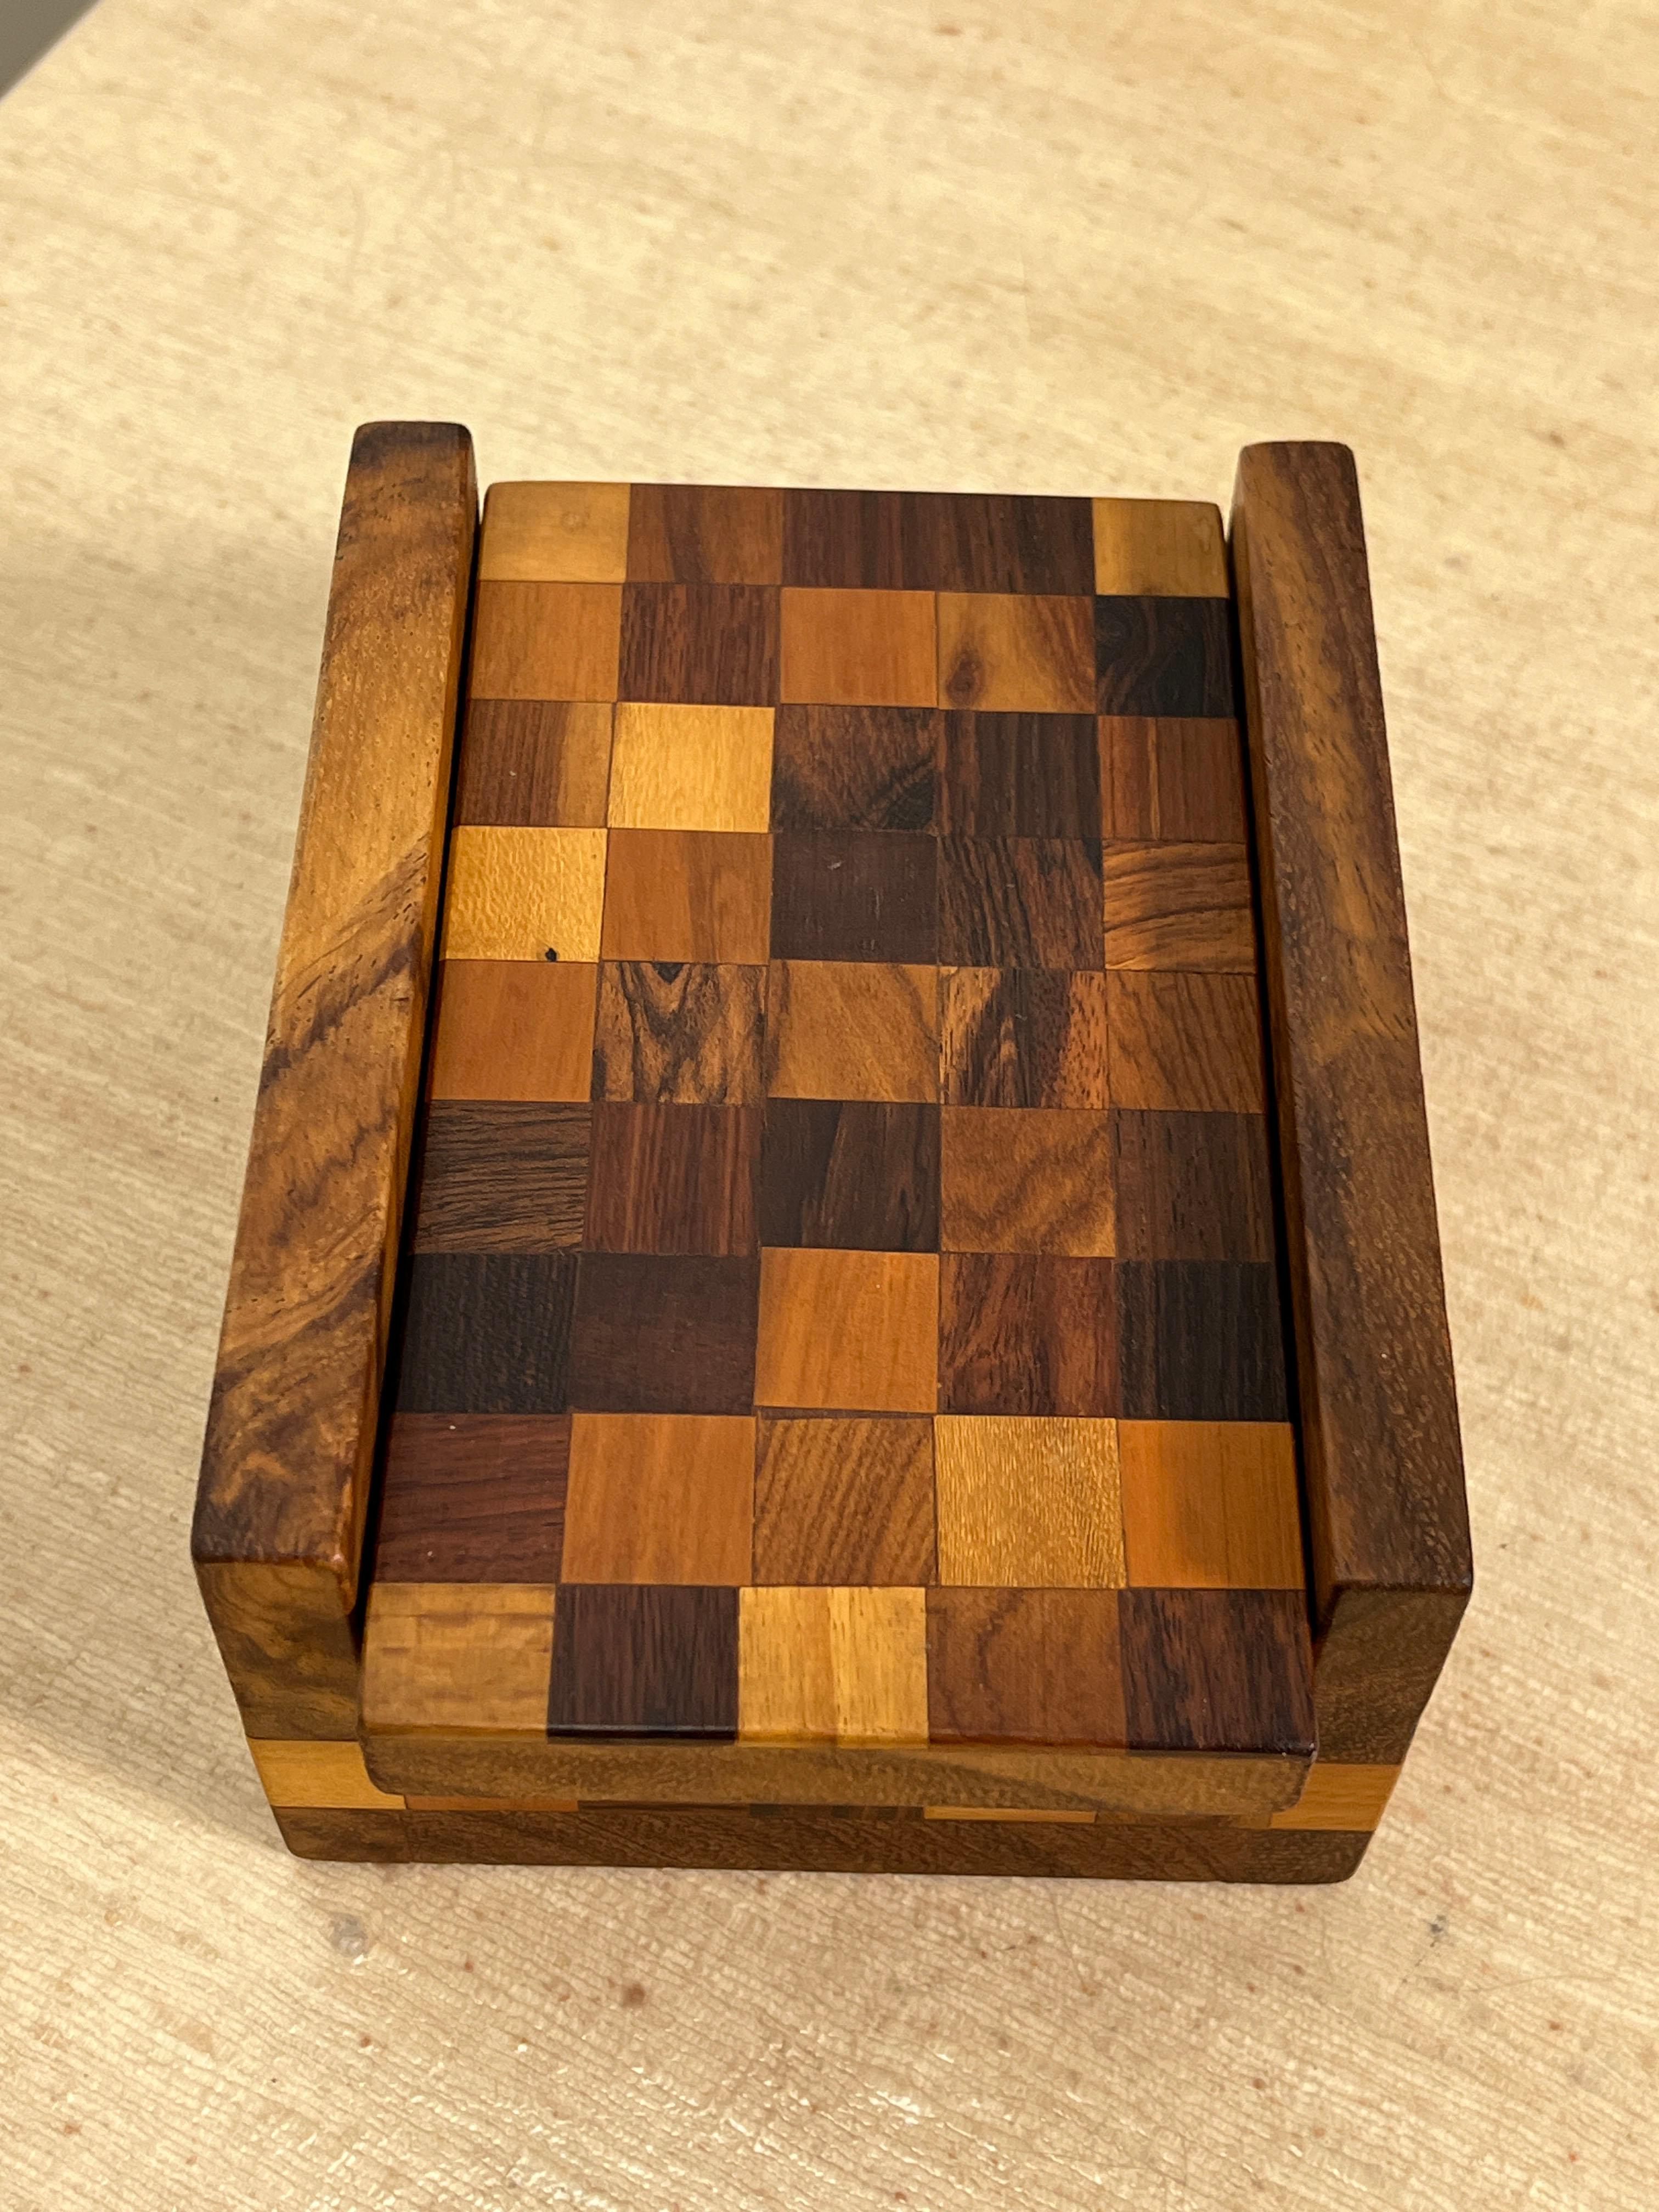 Mixed woods trinket box, including rosewood and Mexican hardwoods such as jacaranda and cocobolo, by Don Shoemaker, Mexico, circa 1960s.